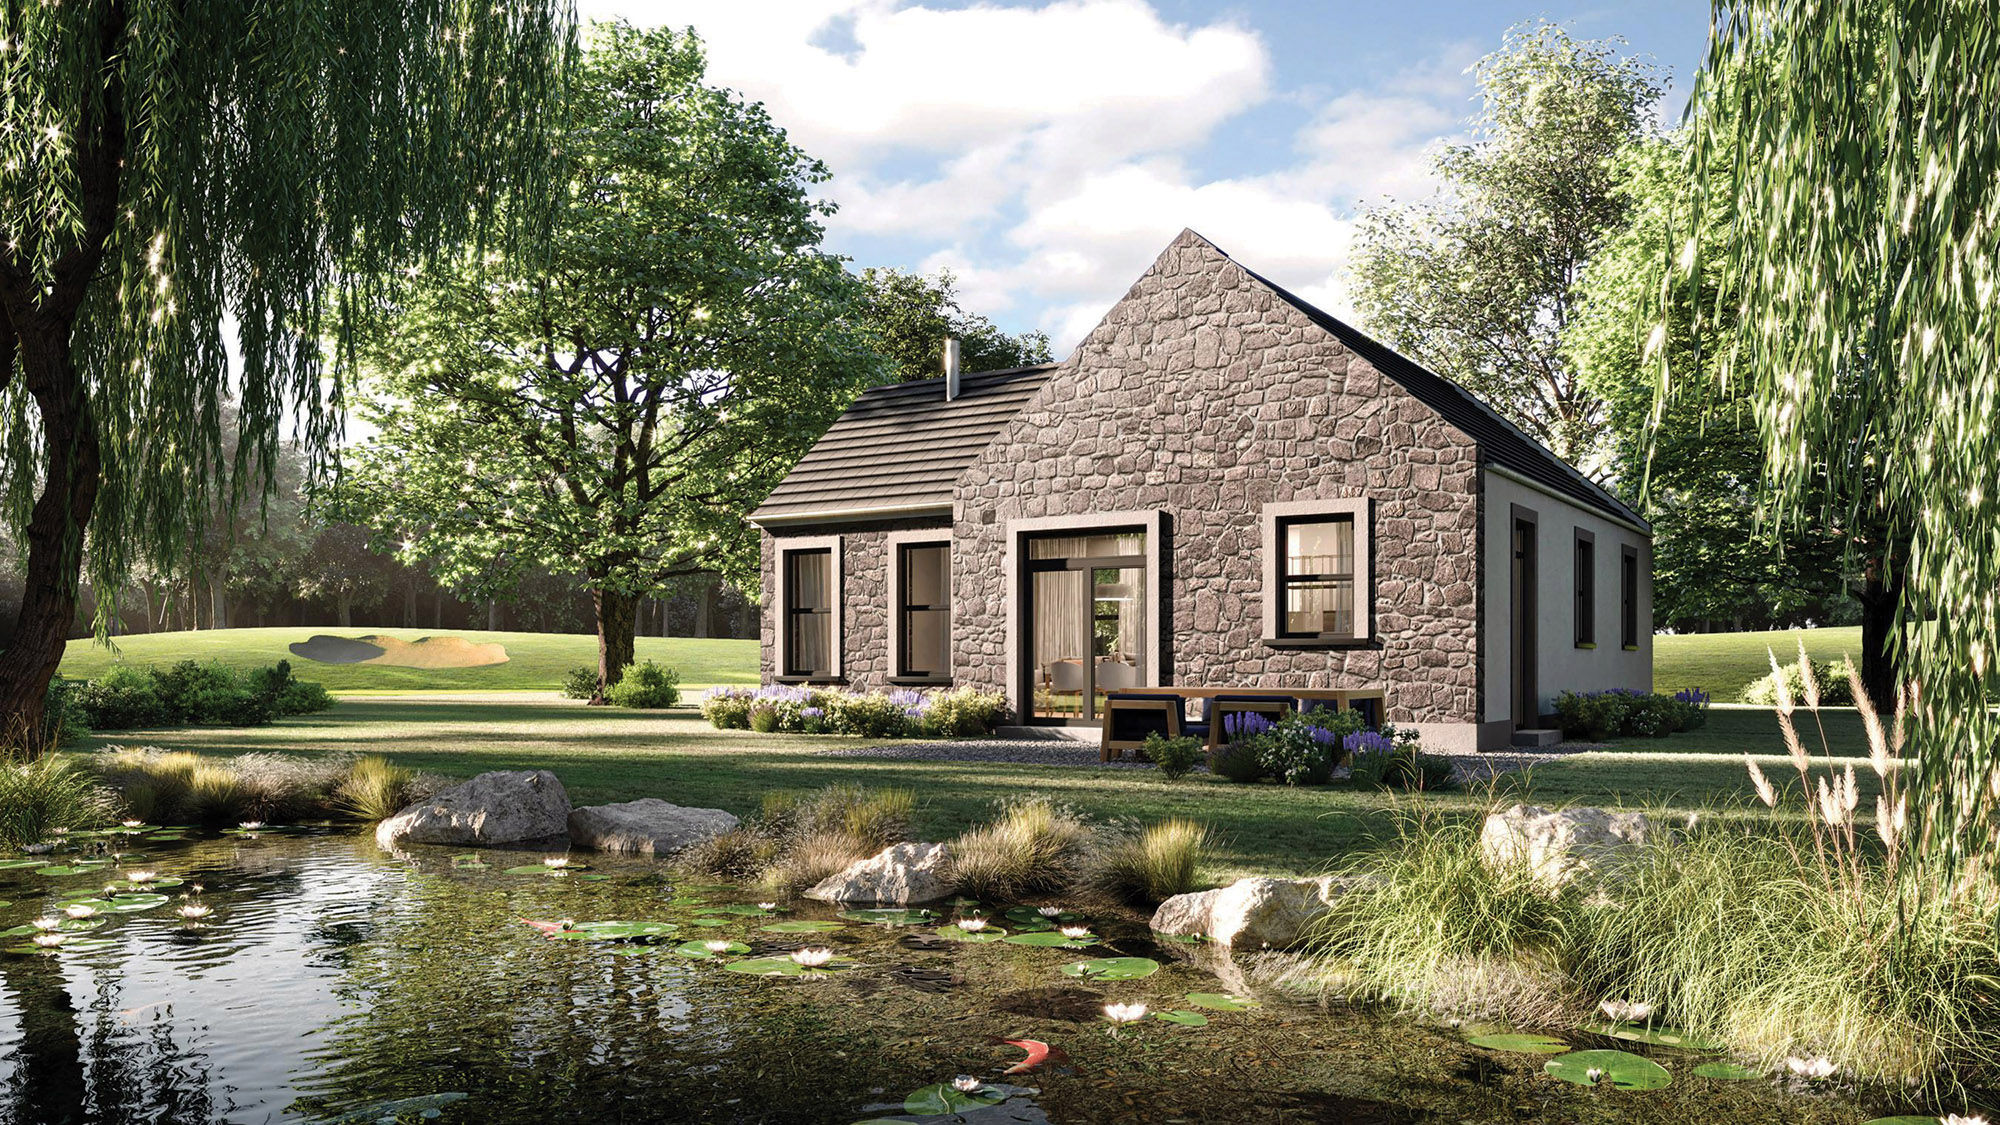 A rendering of the Teviot Cottage, part of expansion plans at the Schloss Roxburghe Hotel & Golf Course.